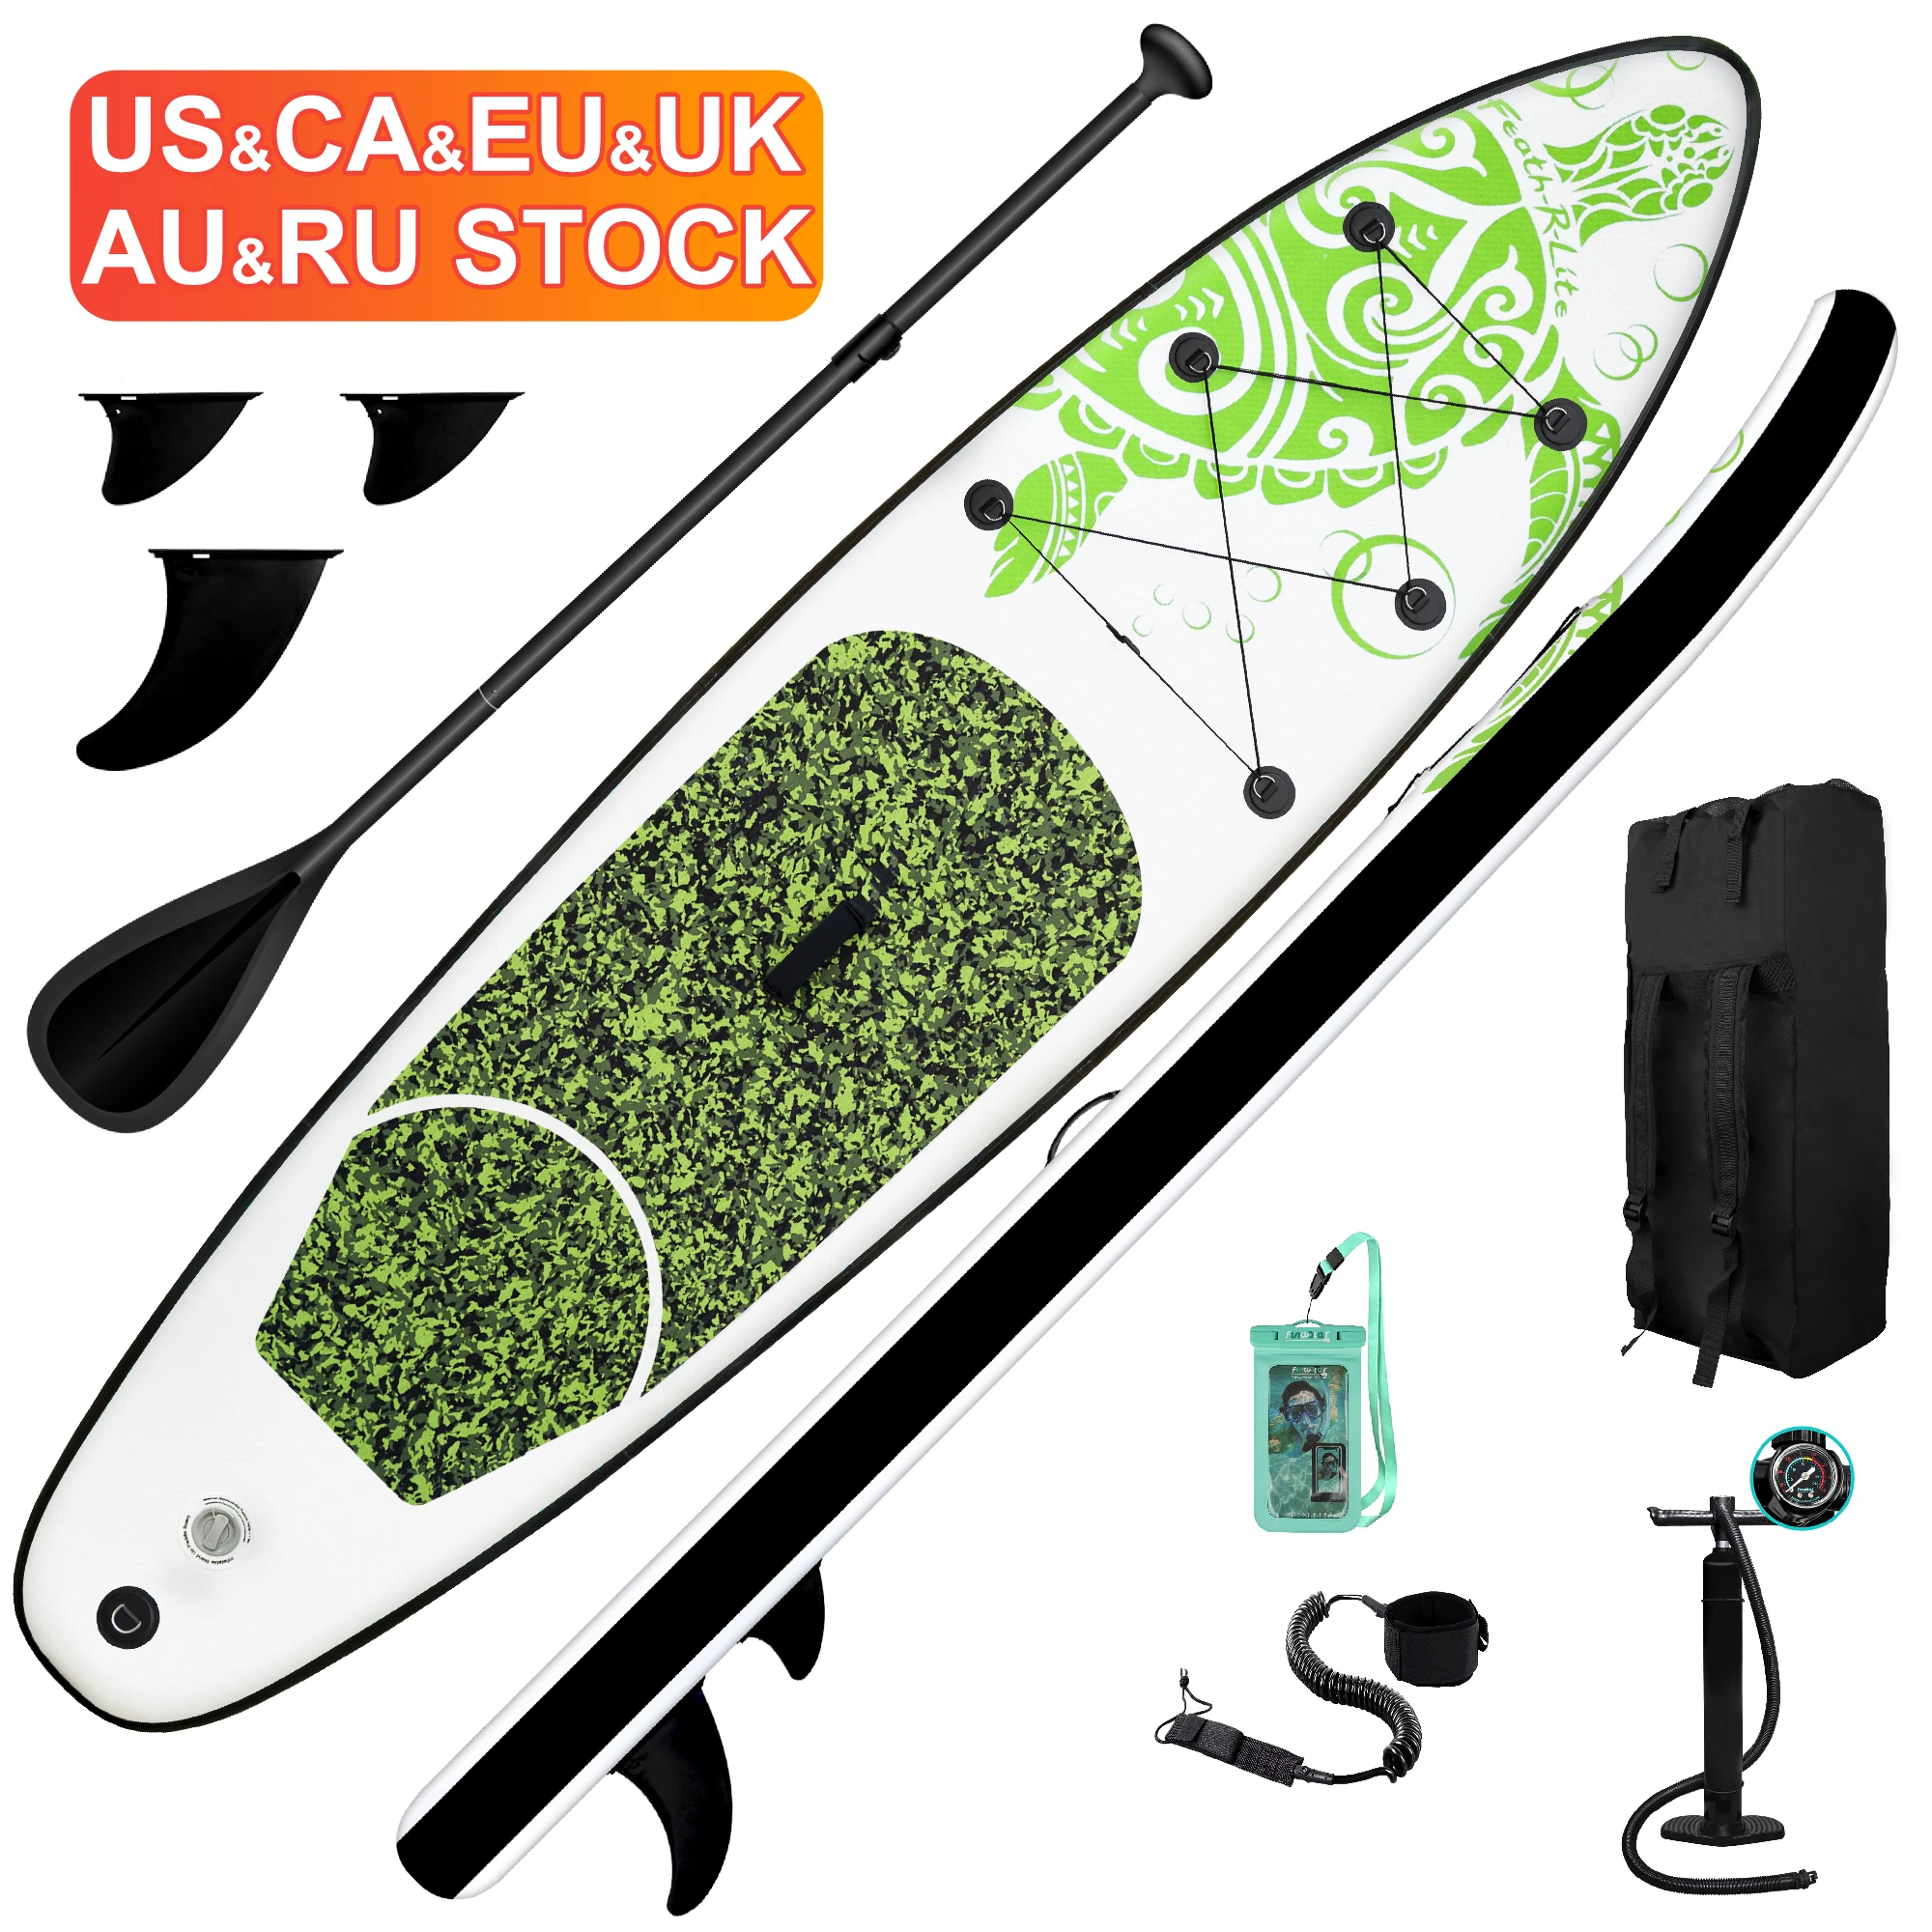 

FUNWATER Dropshipping OEM paddles sup inflatable gonflable paddleboard prancha de surf surfboard pedal board softboard surf